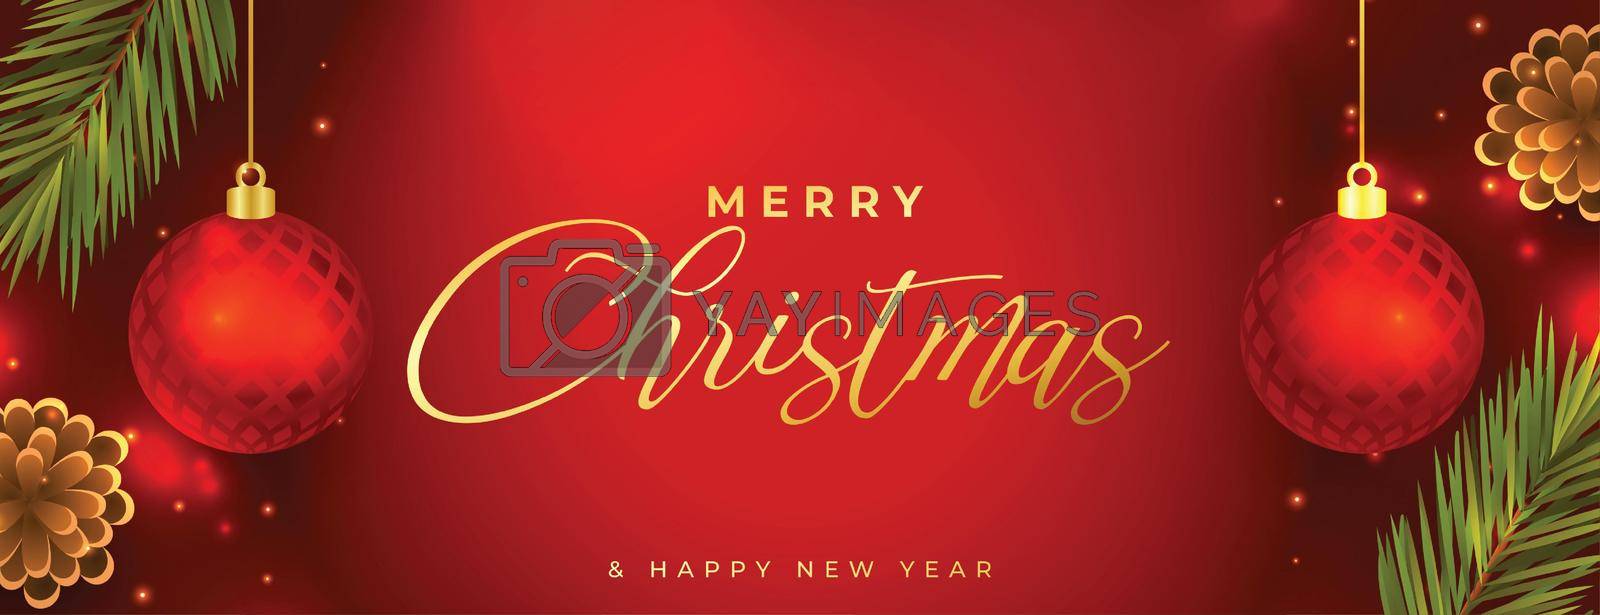 realistic merry christmas celebration greeting banner